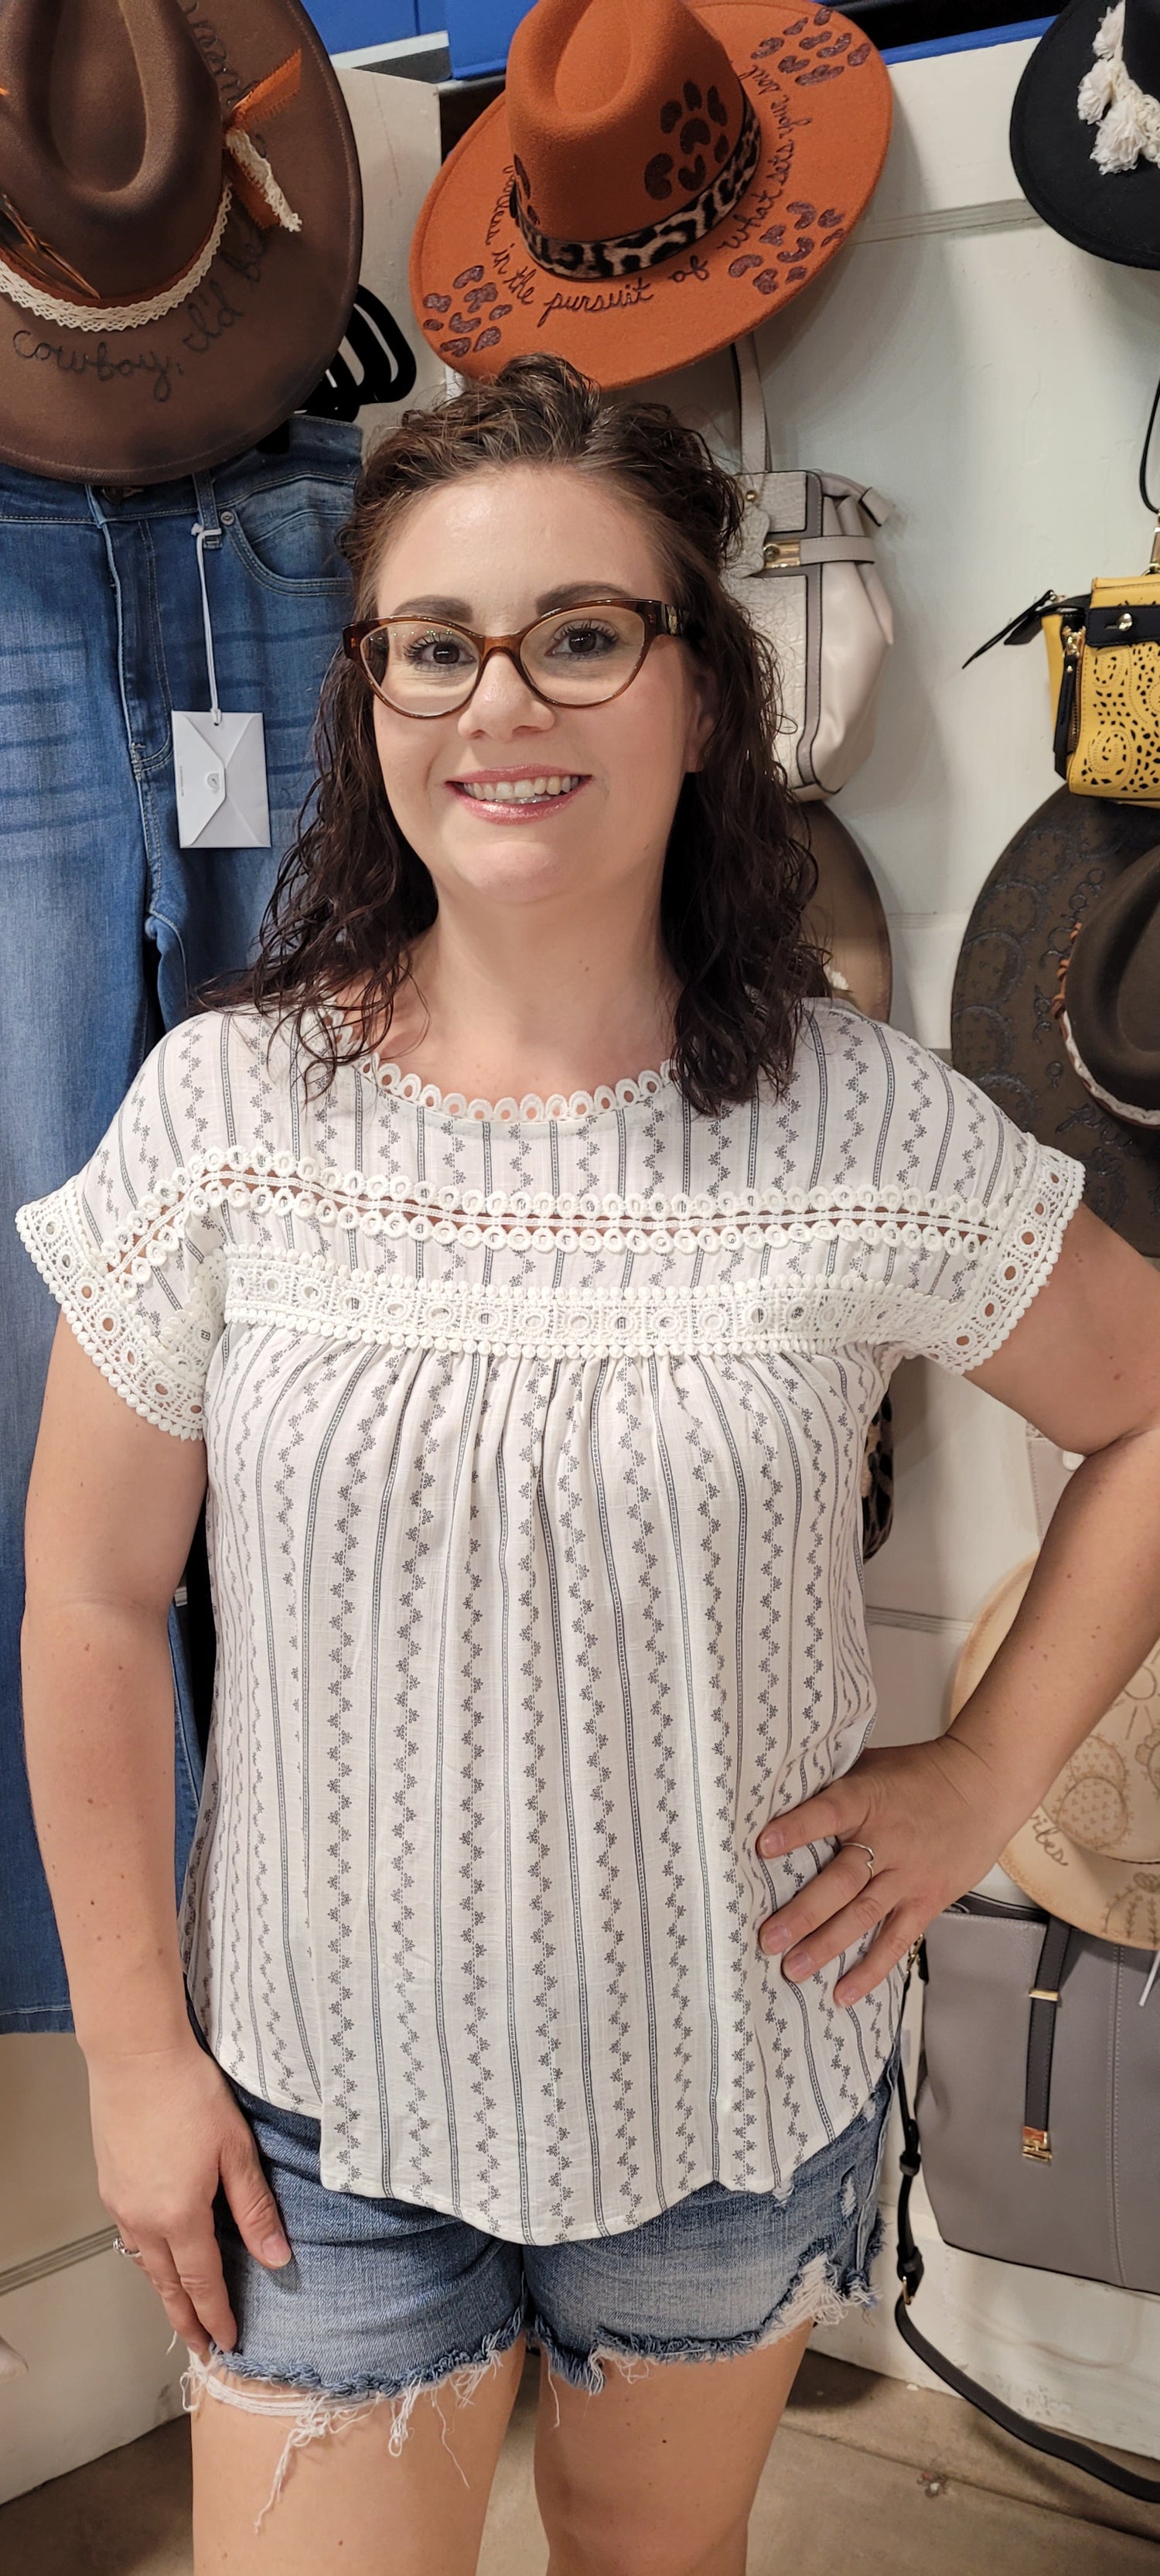 Feel flirty and fun in our Zig Zag Top! This cute top has an eye catching lace trim round neckline, extended shoulders, and dolman sleeves with lace trim. Plus, the front lace inset detail and back non-functional buttons will keep heads turning! Who says fashion can't be playful? Sashay into the room in this statement piece! Sizes small through large.